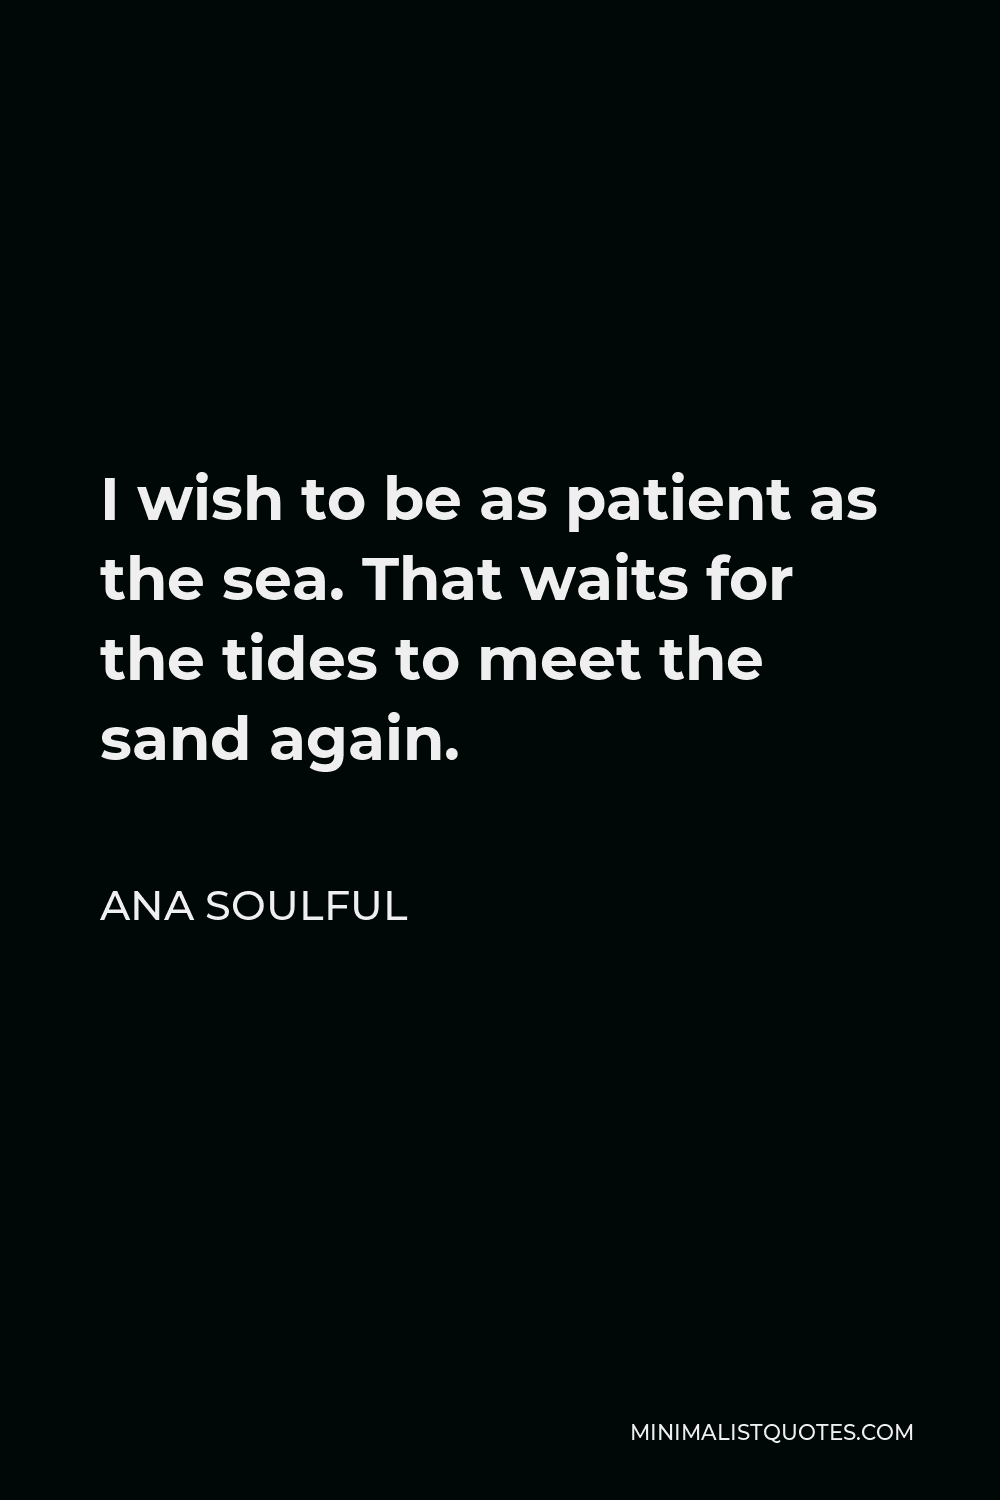 Ana Soulful Quote - I wish to be as patient as the sea; that waits for the tides to meet the sand again.